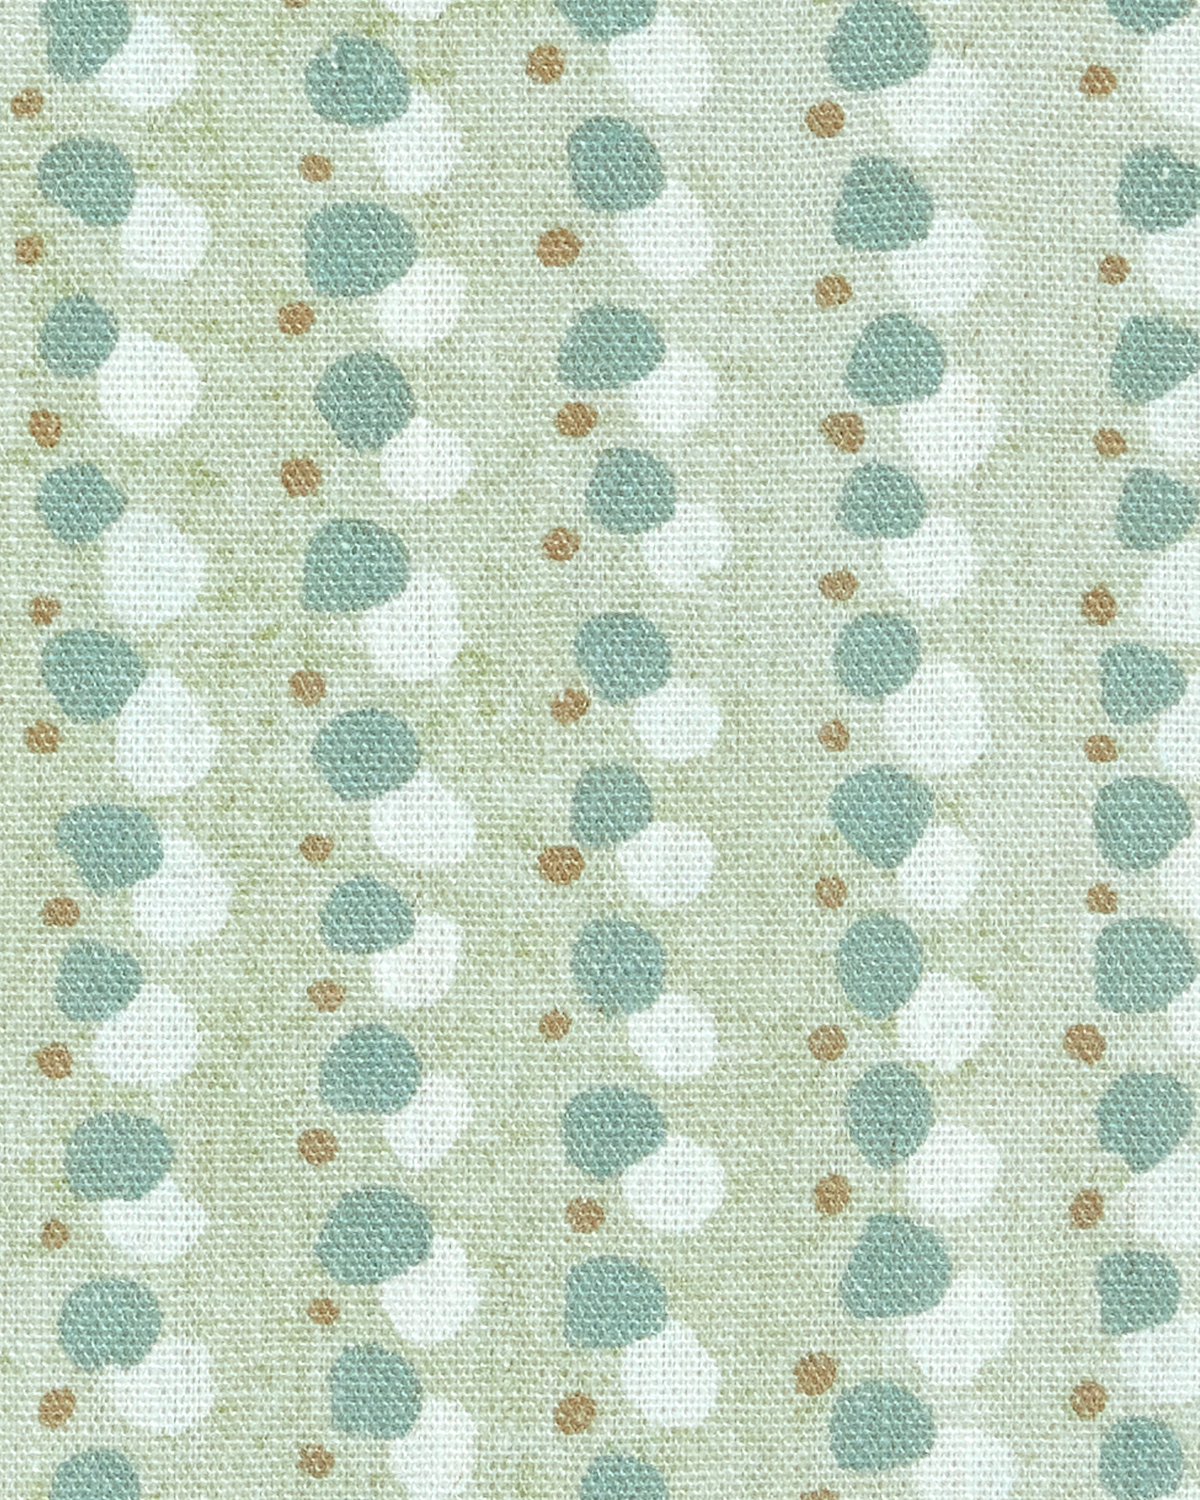 Dotted Lines Fabric in Pistachio